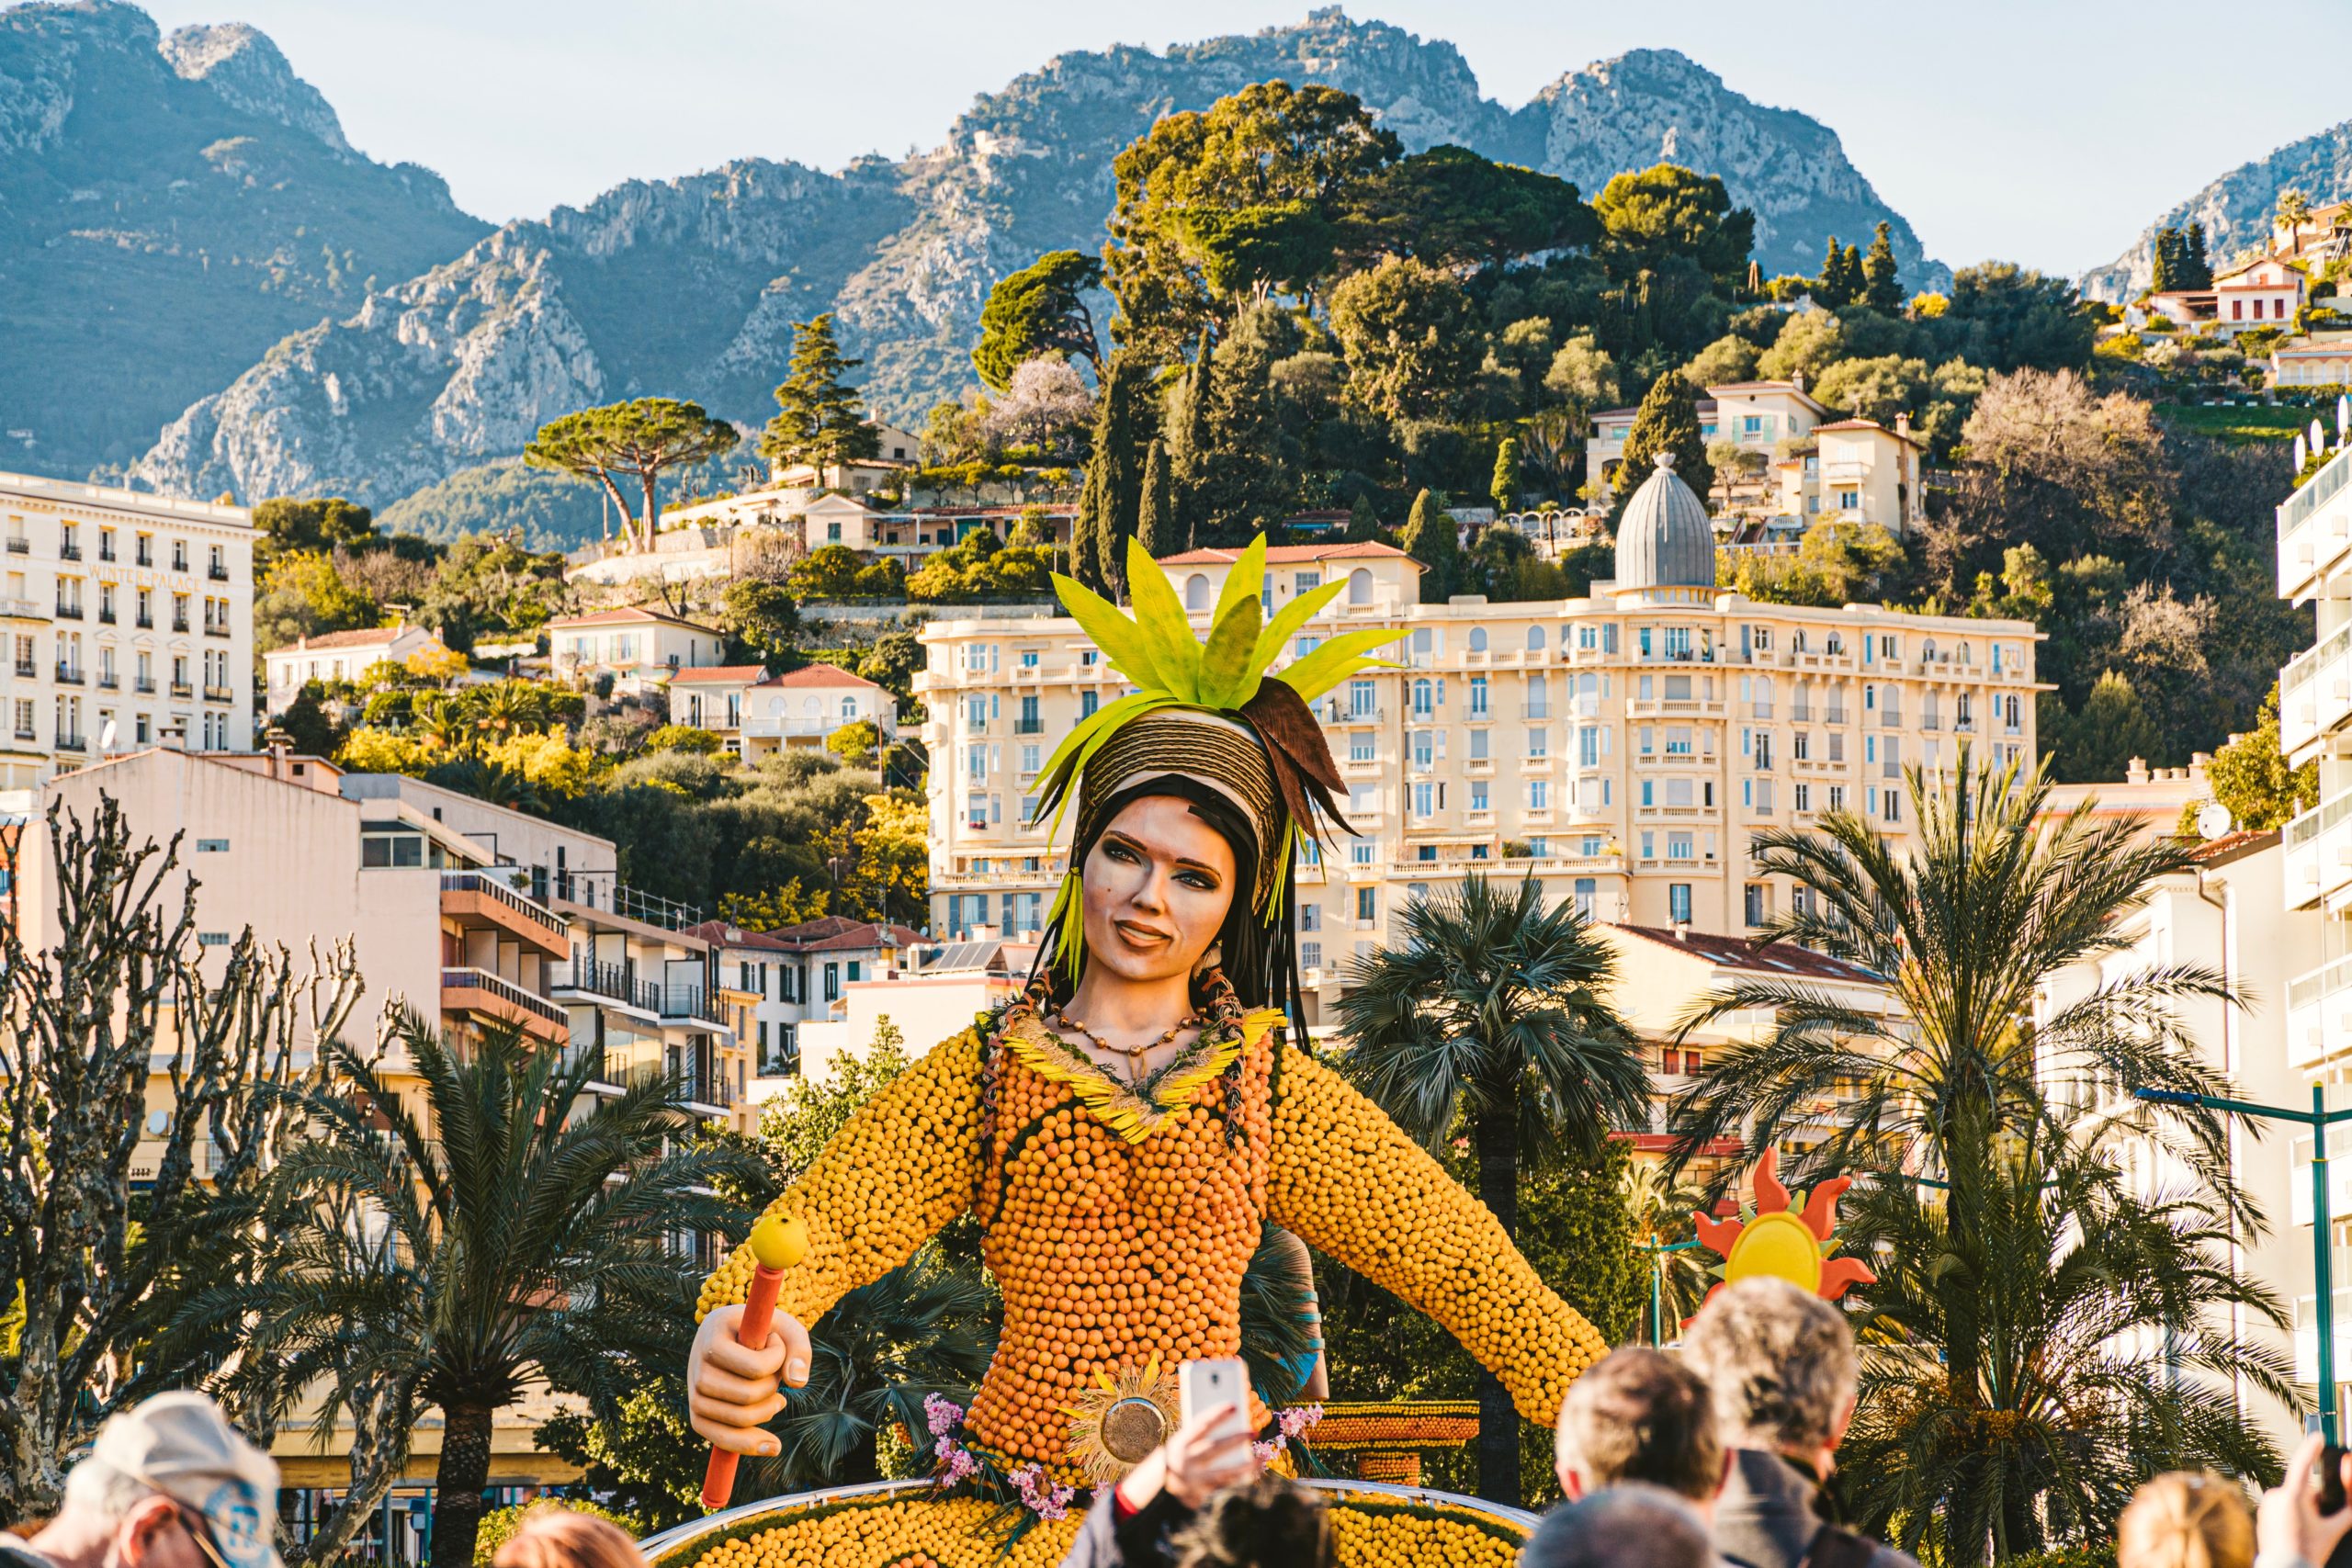 Parade of the Lemon Festival in Menton on the French Riviera in february